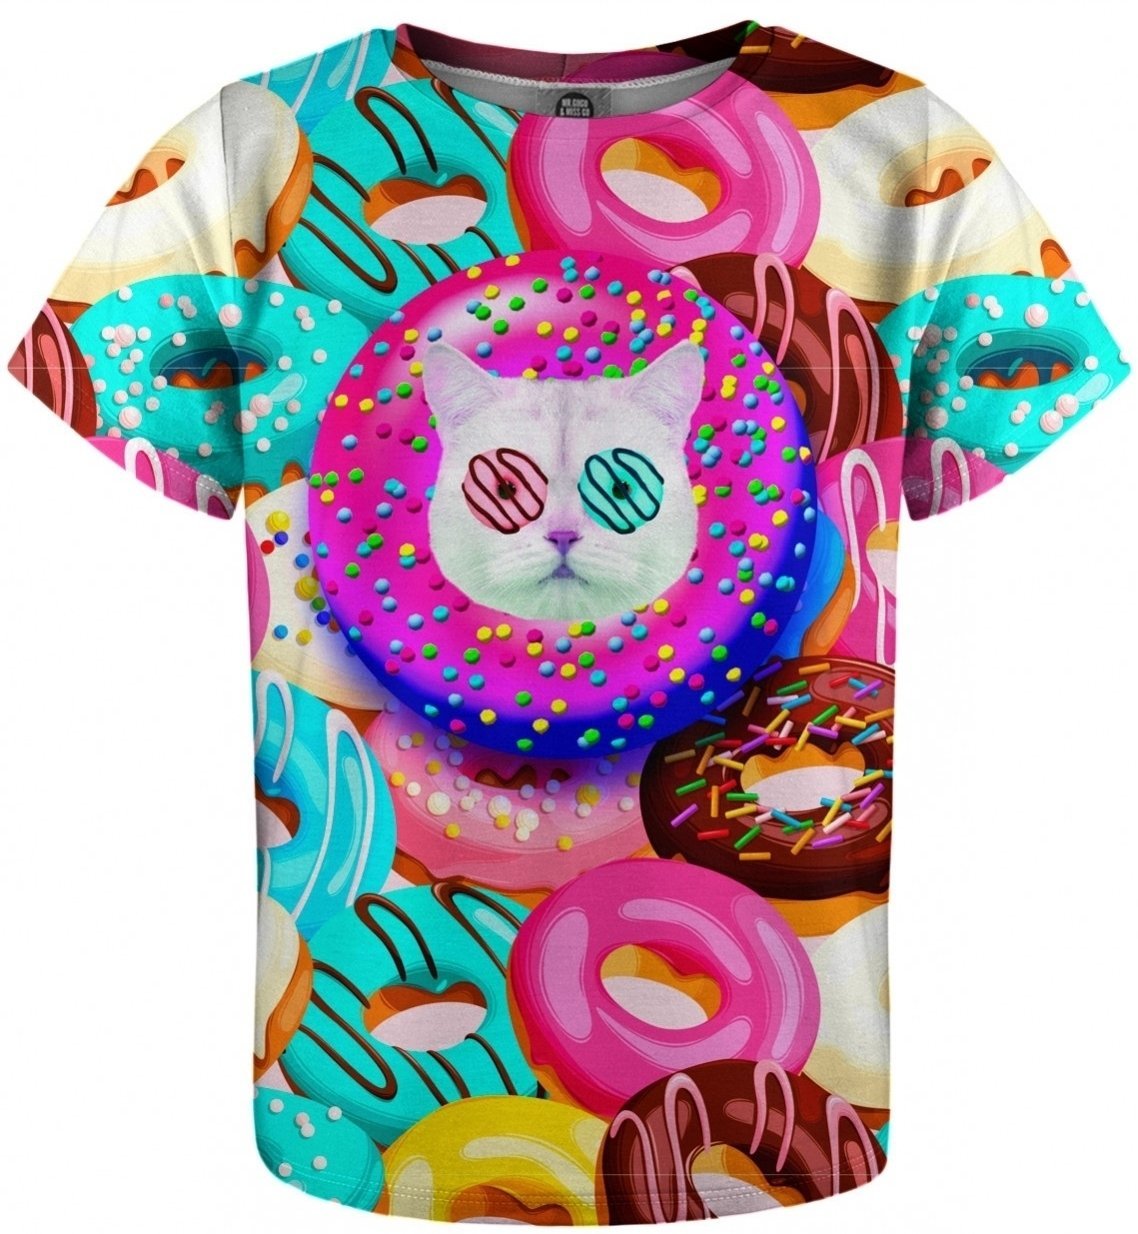 T-Shirt Mr. Gugu and Miss Go Donut Cat T-Shirt for Kids 6-8 yrs